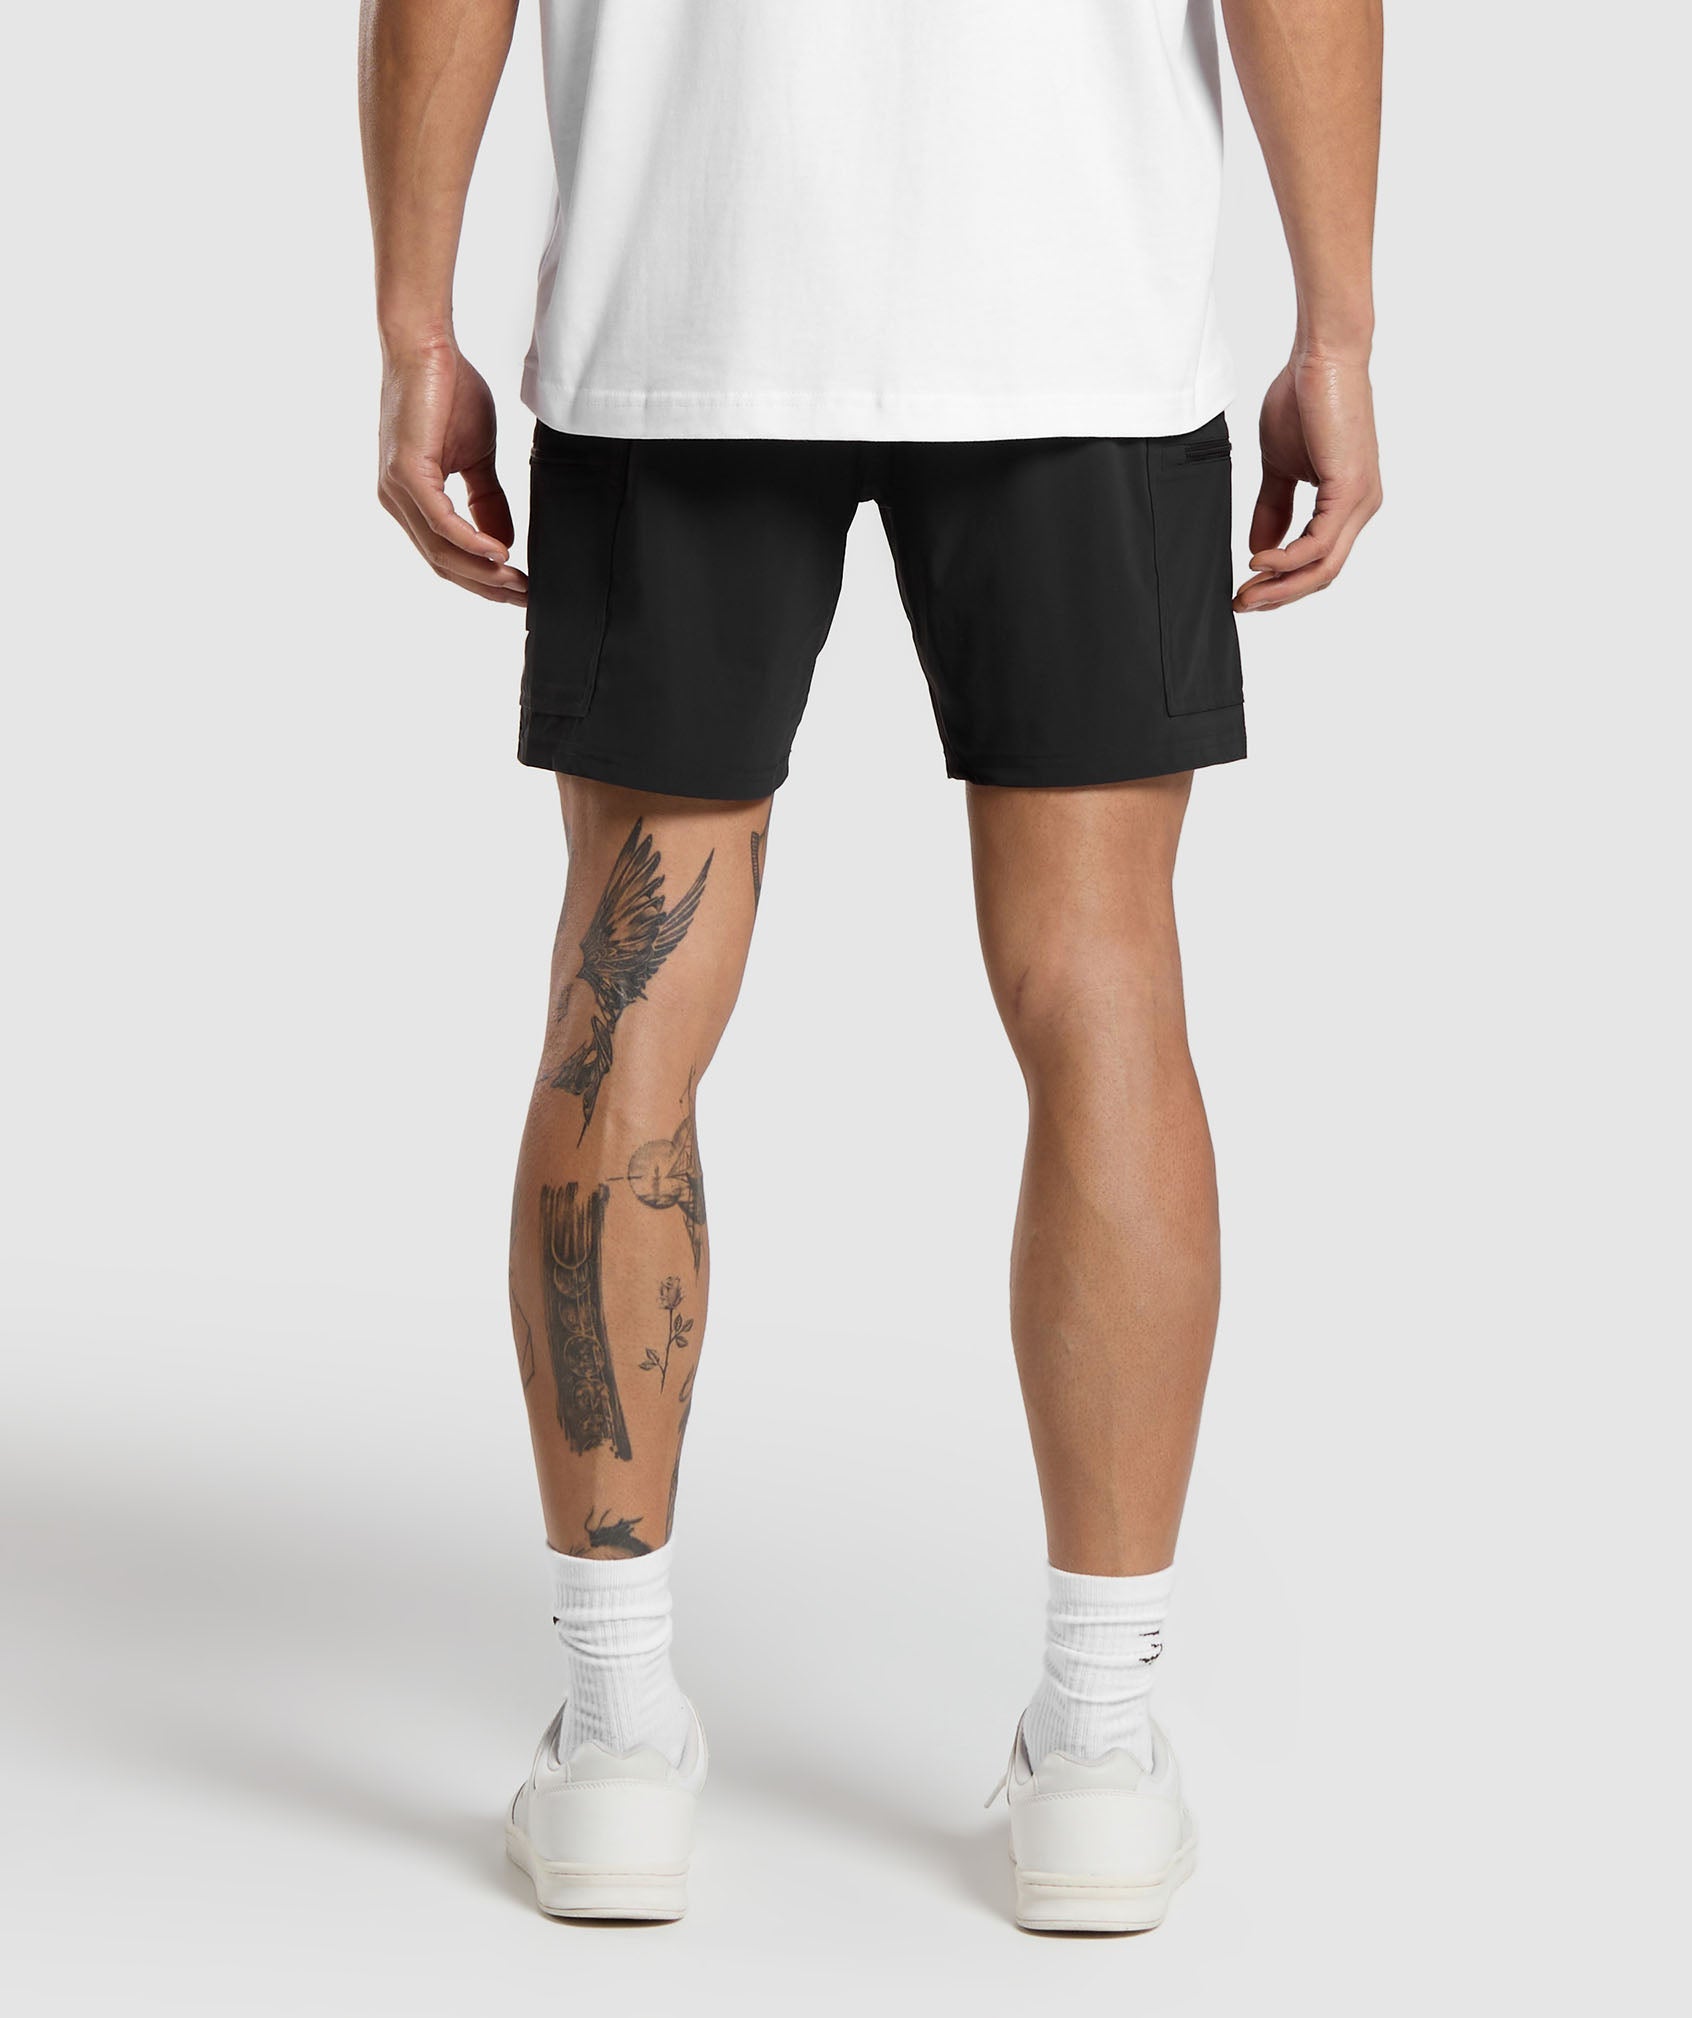 Rest Day 6" Cargo Shorts in Black - view 2